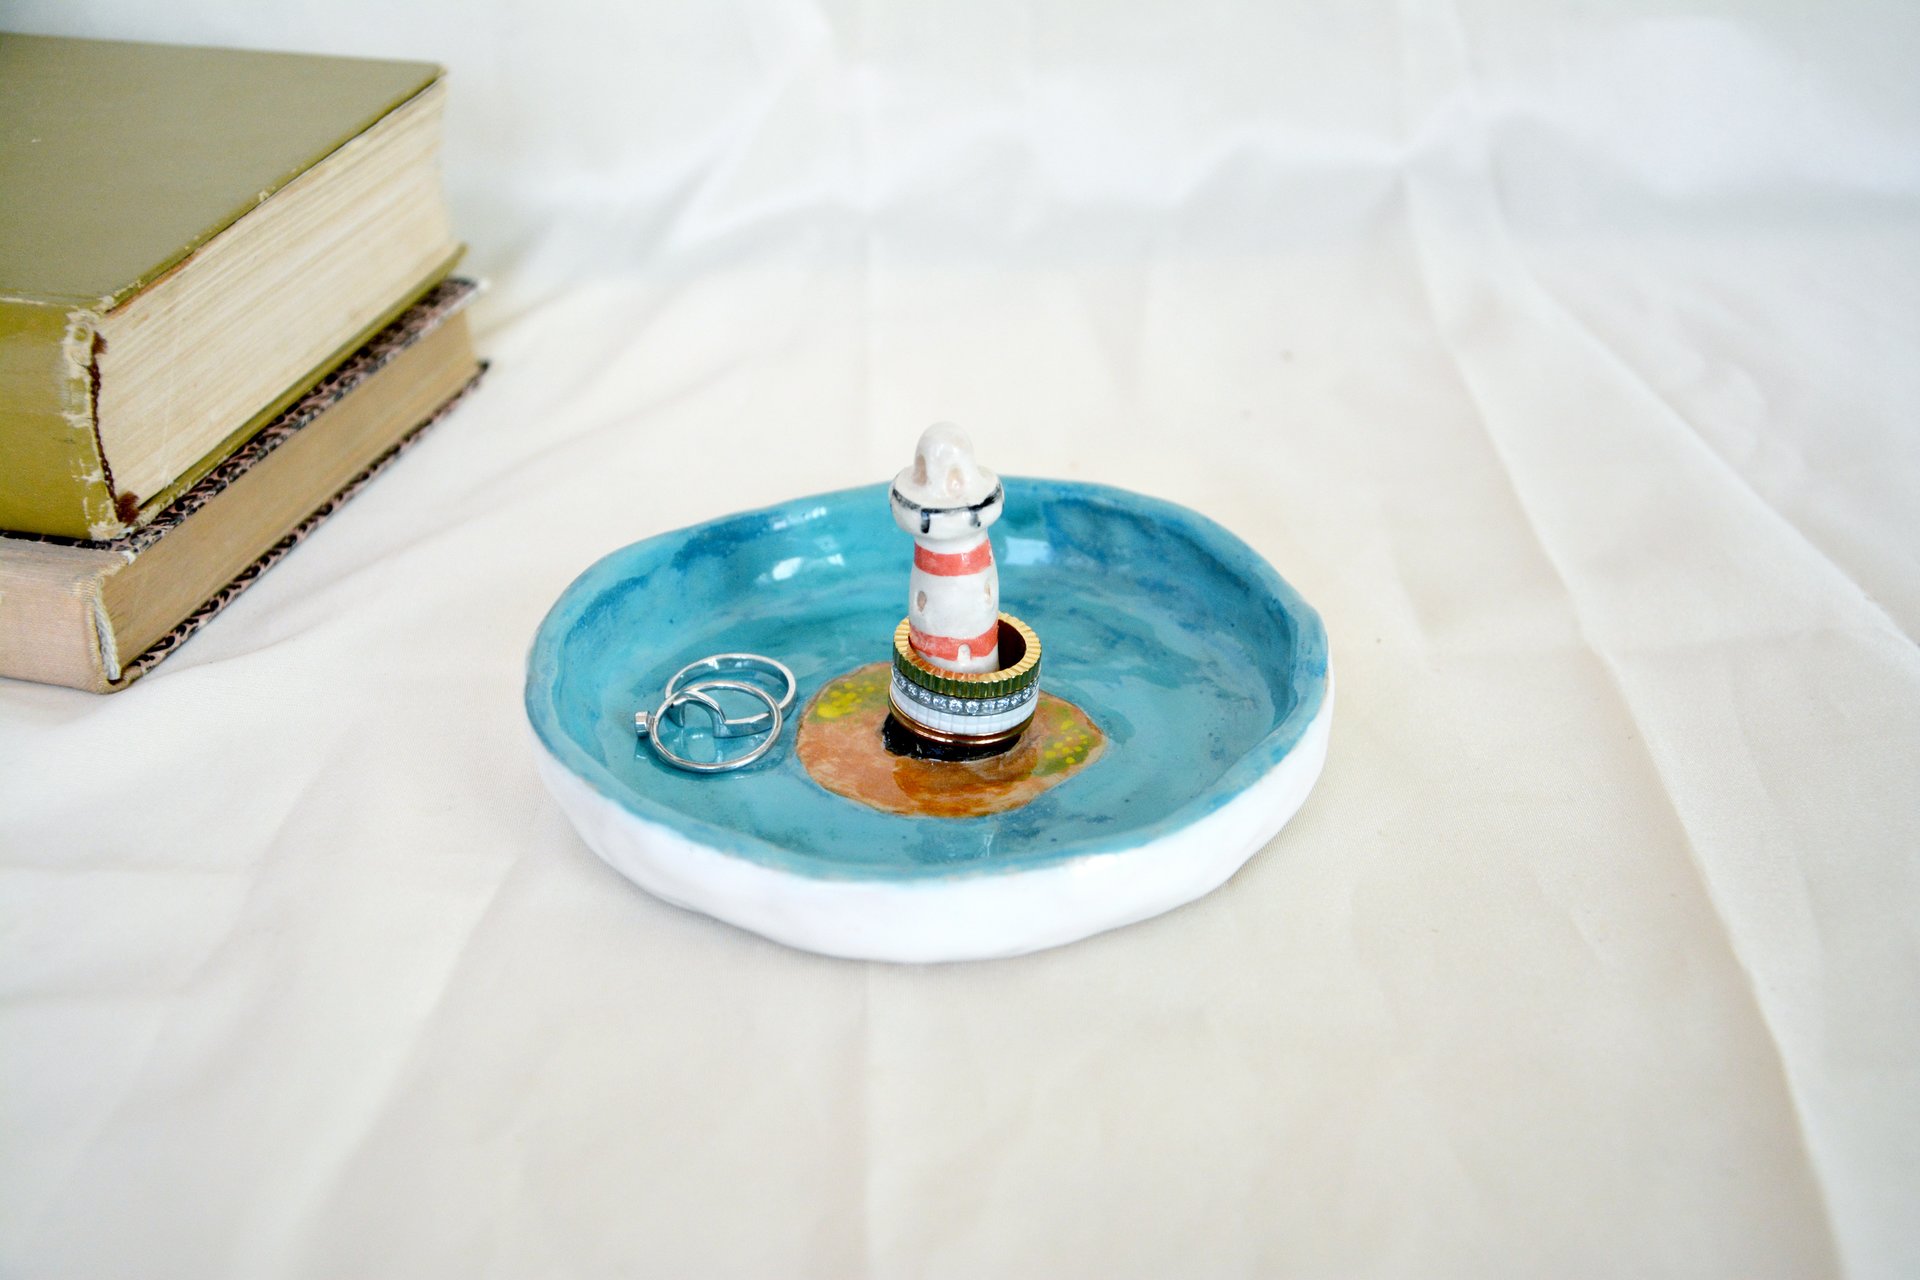 Saucer with Lighthouse - Ceramic ring's holders, diameter - 12 cm, height - 5.5 cm., photo 1 of 1.